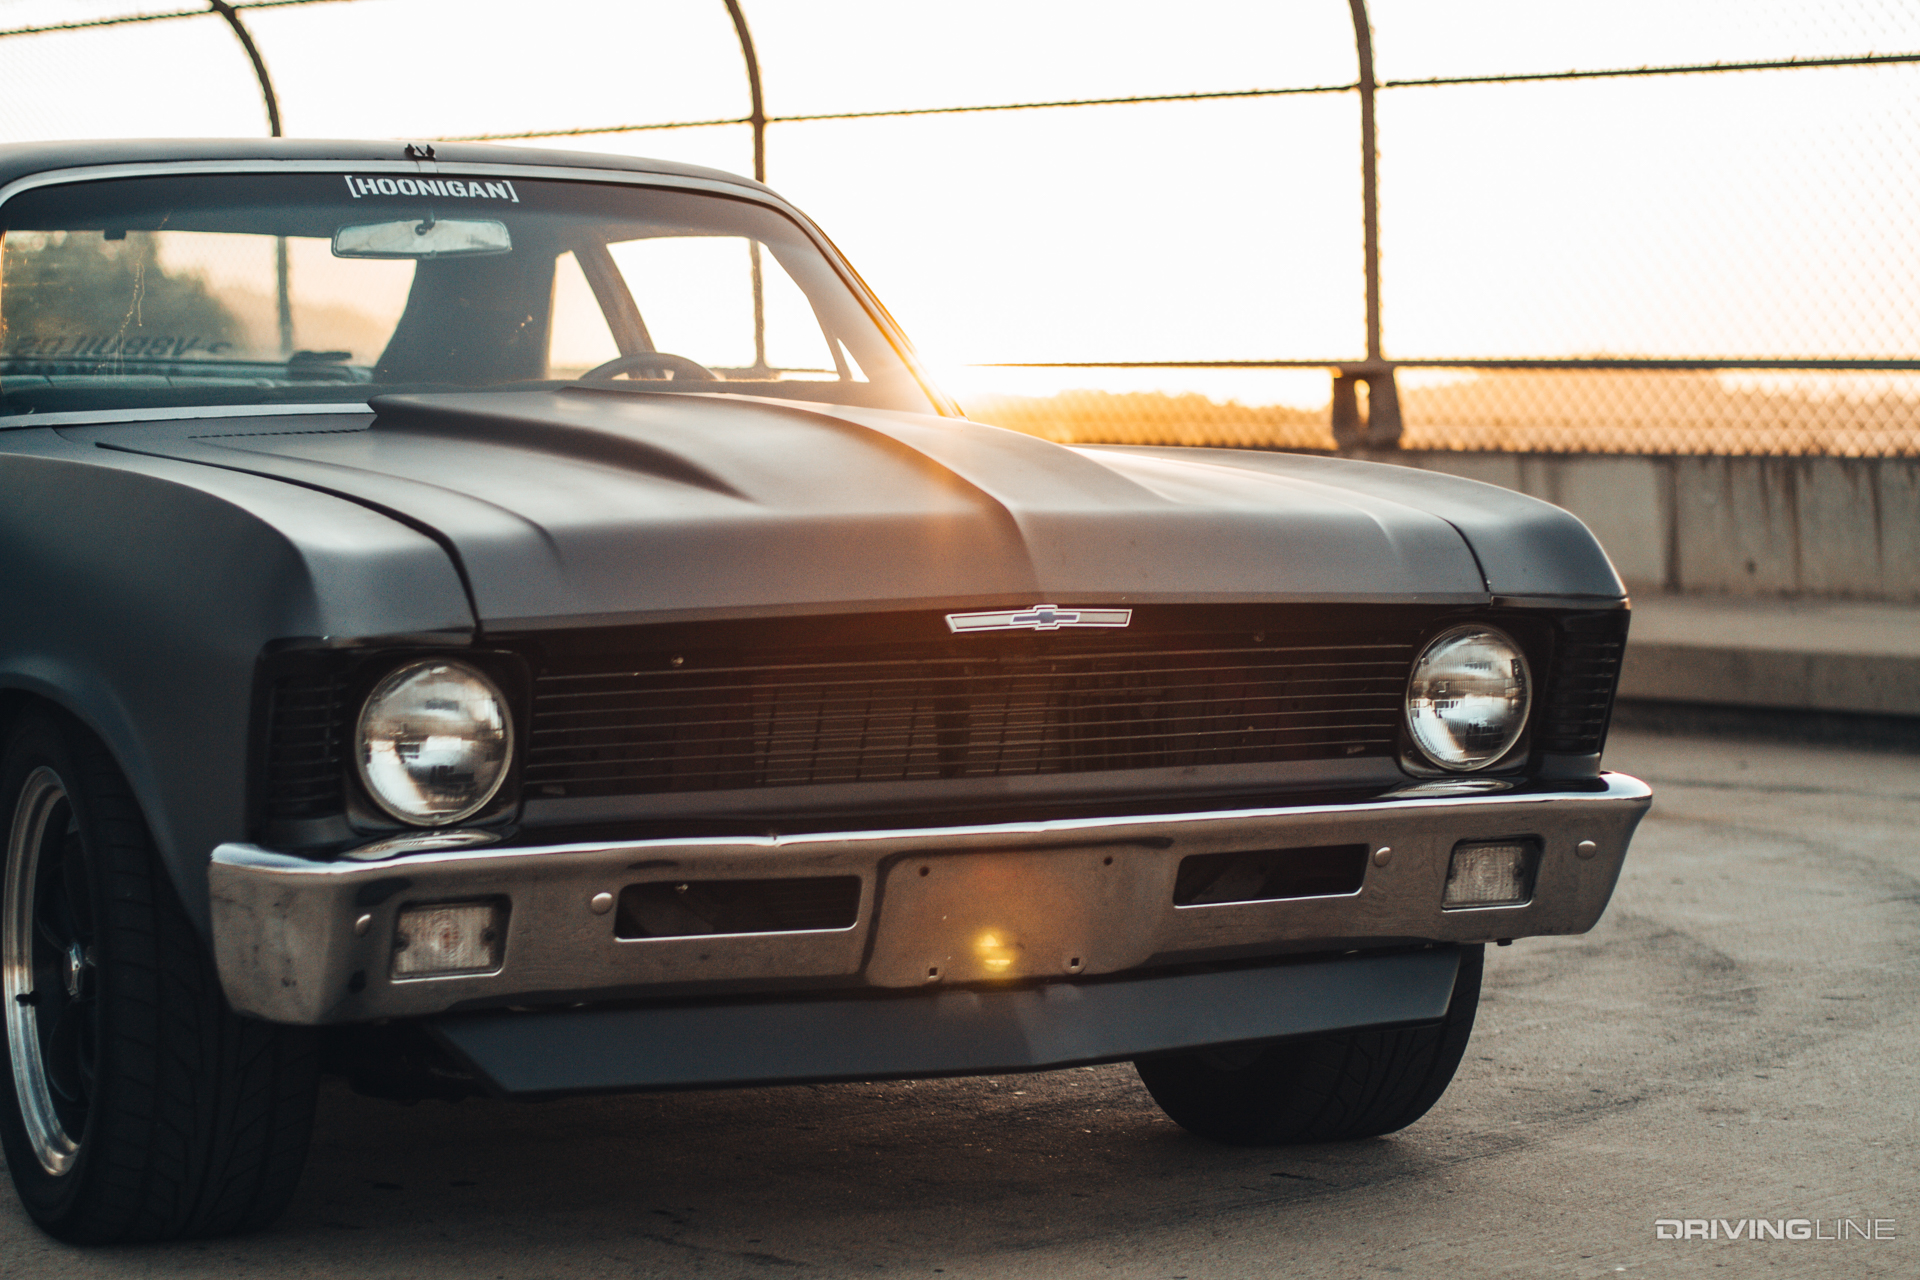 Ride of the Week: A Made-For-Thrills '70 Chevy Nova ...